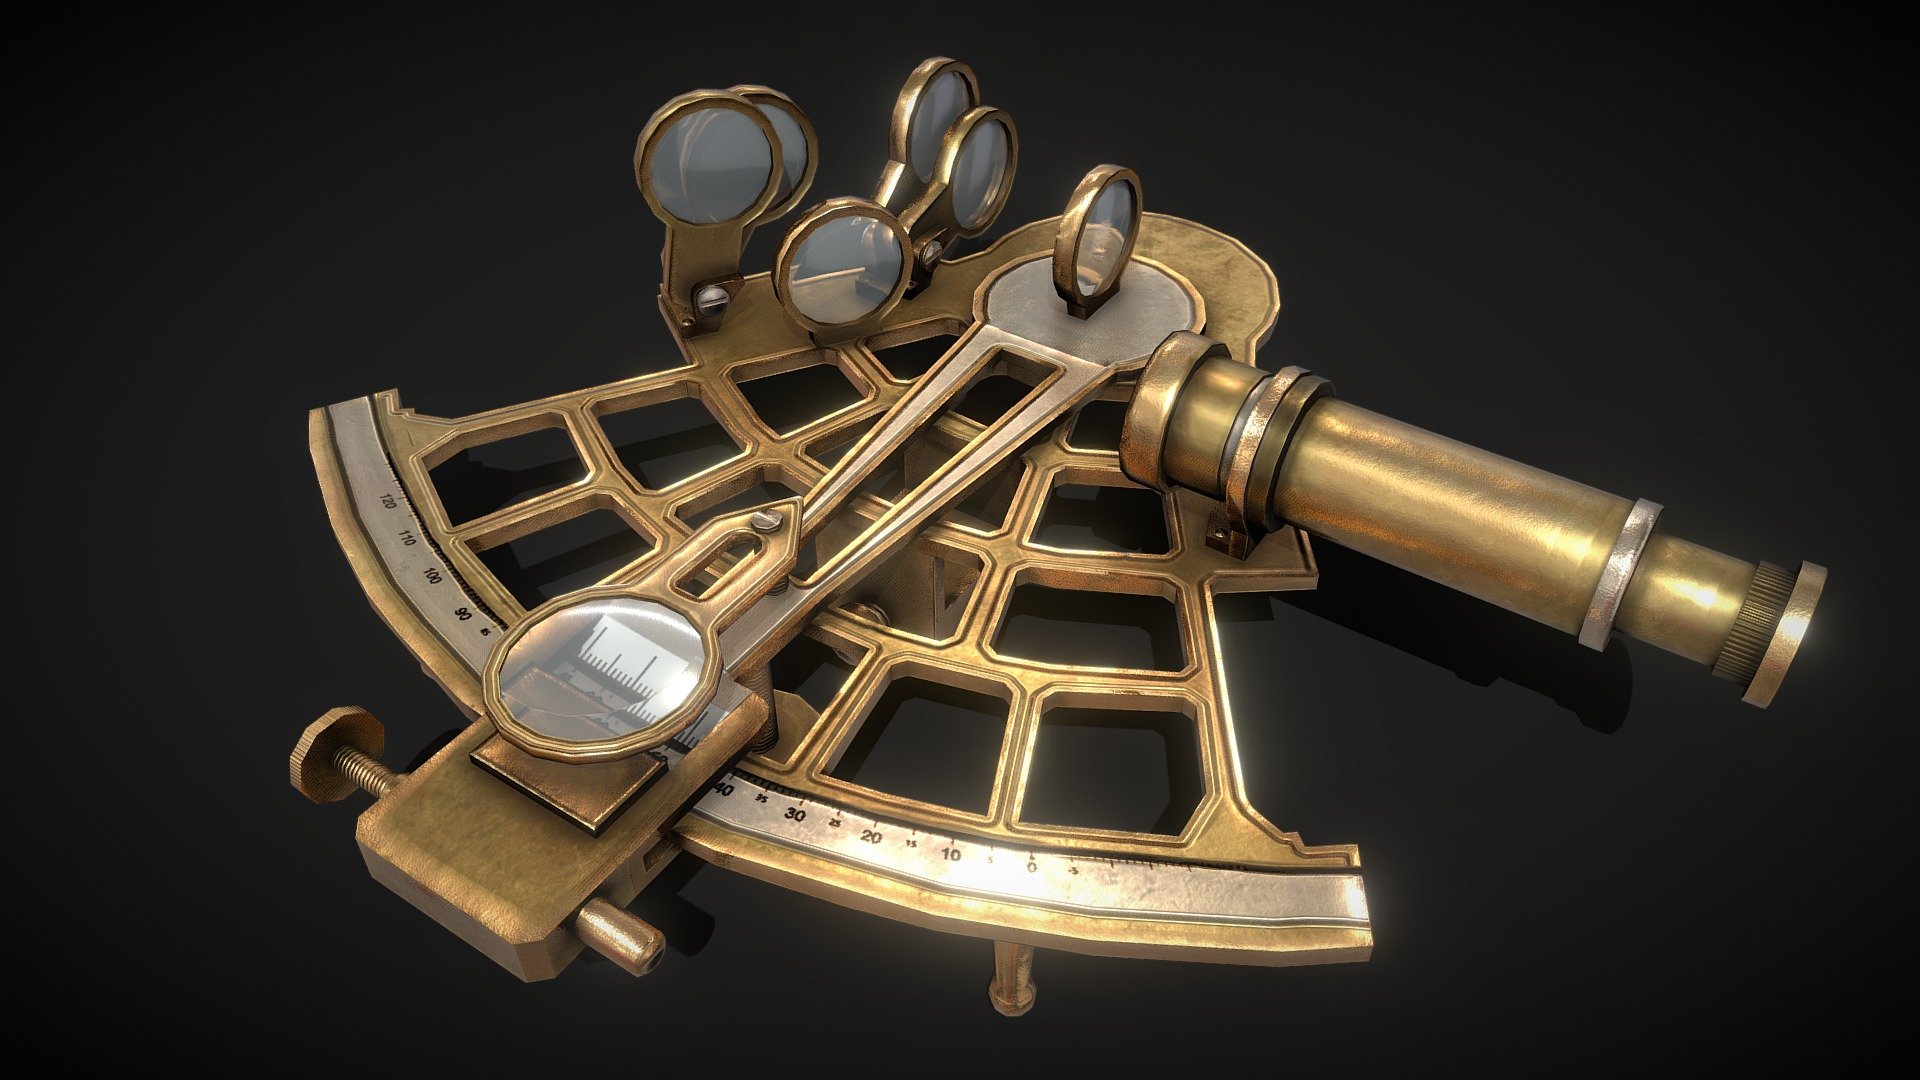 Antique Sextant Telescope - low poly

Triangles: 4.9k
Vertices: 2.7k

4096x4096 PNG texture - Antique Sextant Telescope - low poly - Buy Royalty Free 3D model by Karolina Renkiewicz (@KarolinaRenkiewicz) 3d model